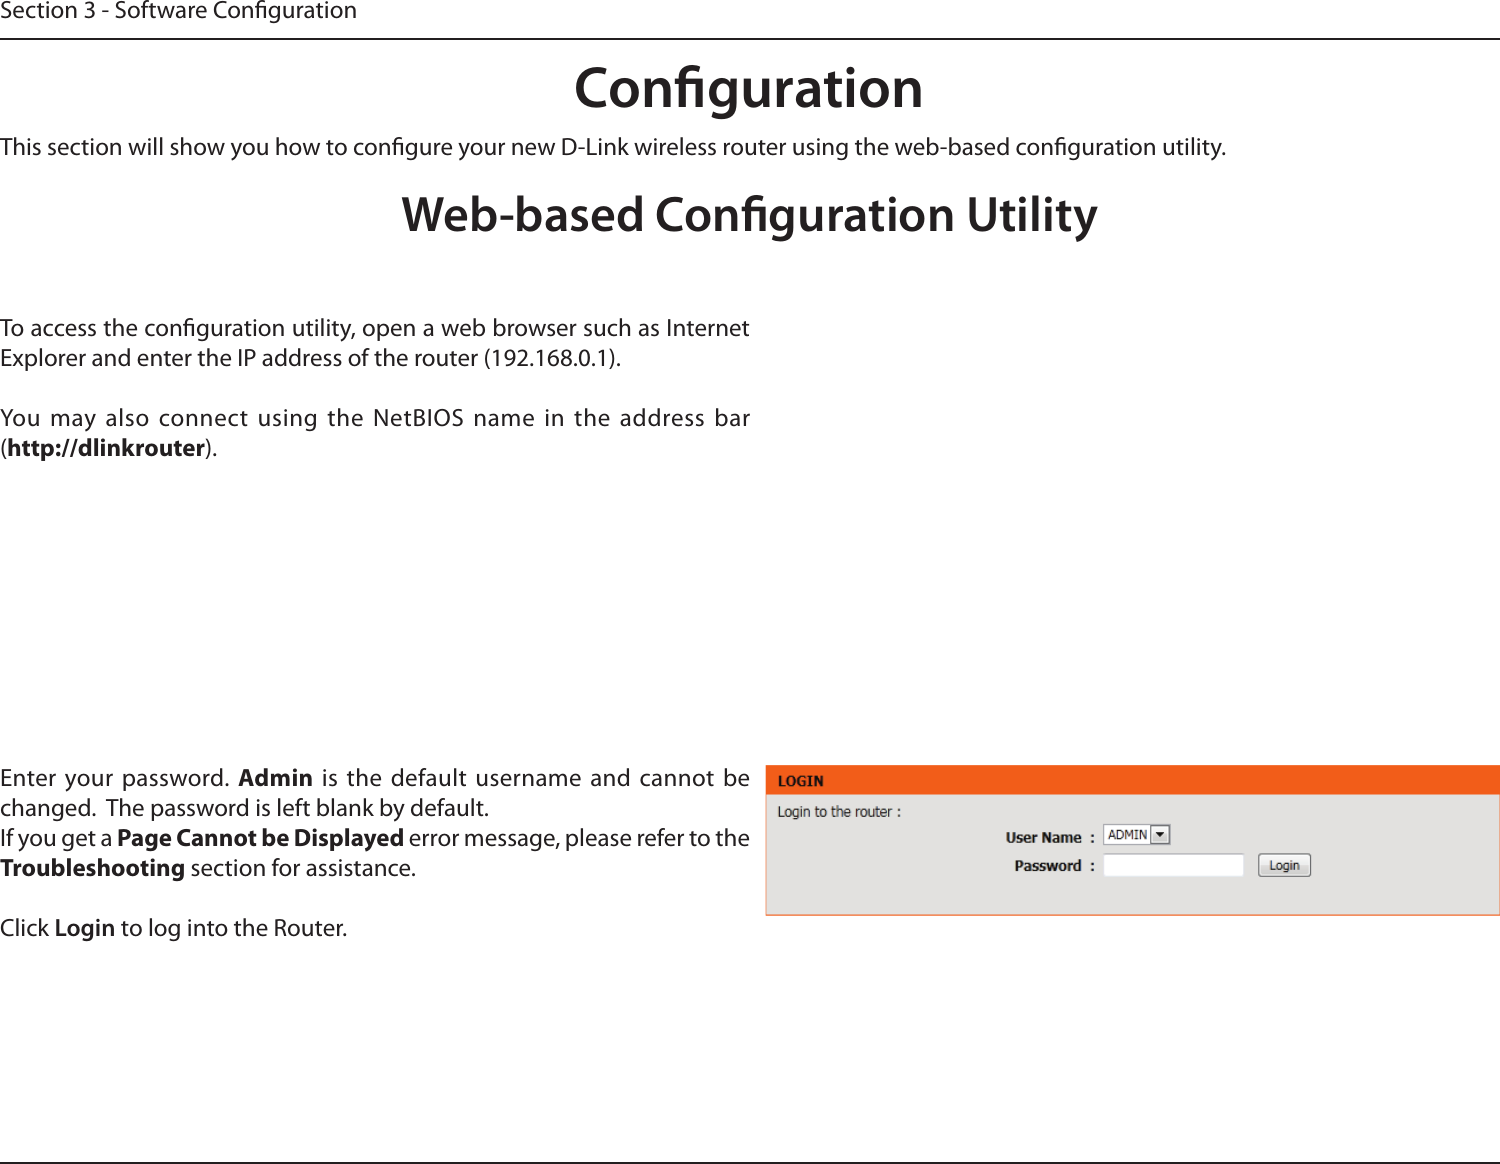 Section 3 - Software CongurationCongurationThis section will show you how to congure your new D-Link wireless router using the web-based conguration utility.Web-based Conguration UtilityTo access the conguration utility, open a web browser such as Internet Explorer and enter the IP address of the router (192.168.0.1).You  may  also connect  using  the  NetBIOS  name  in  the  address  bar (http://dlinkrouter).Enter your  password. Admin is  the  default  username  and  cannot  be changed.  The password is left blank by default.If you get a Page Cannot be Displayed error message, please refer to the Troubleshooting section for assistance.Click Login to log into the Router.